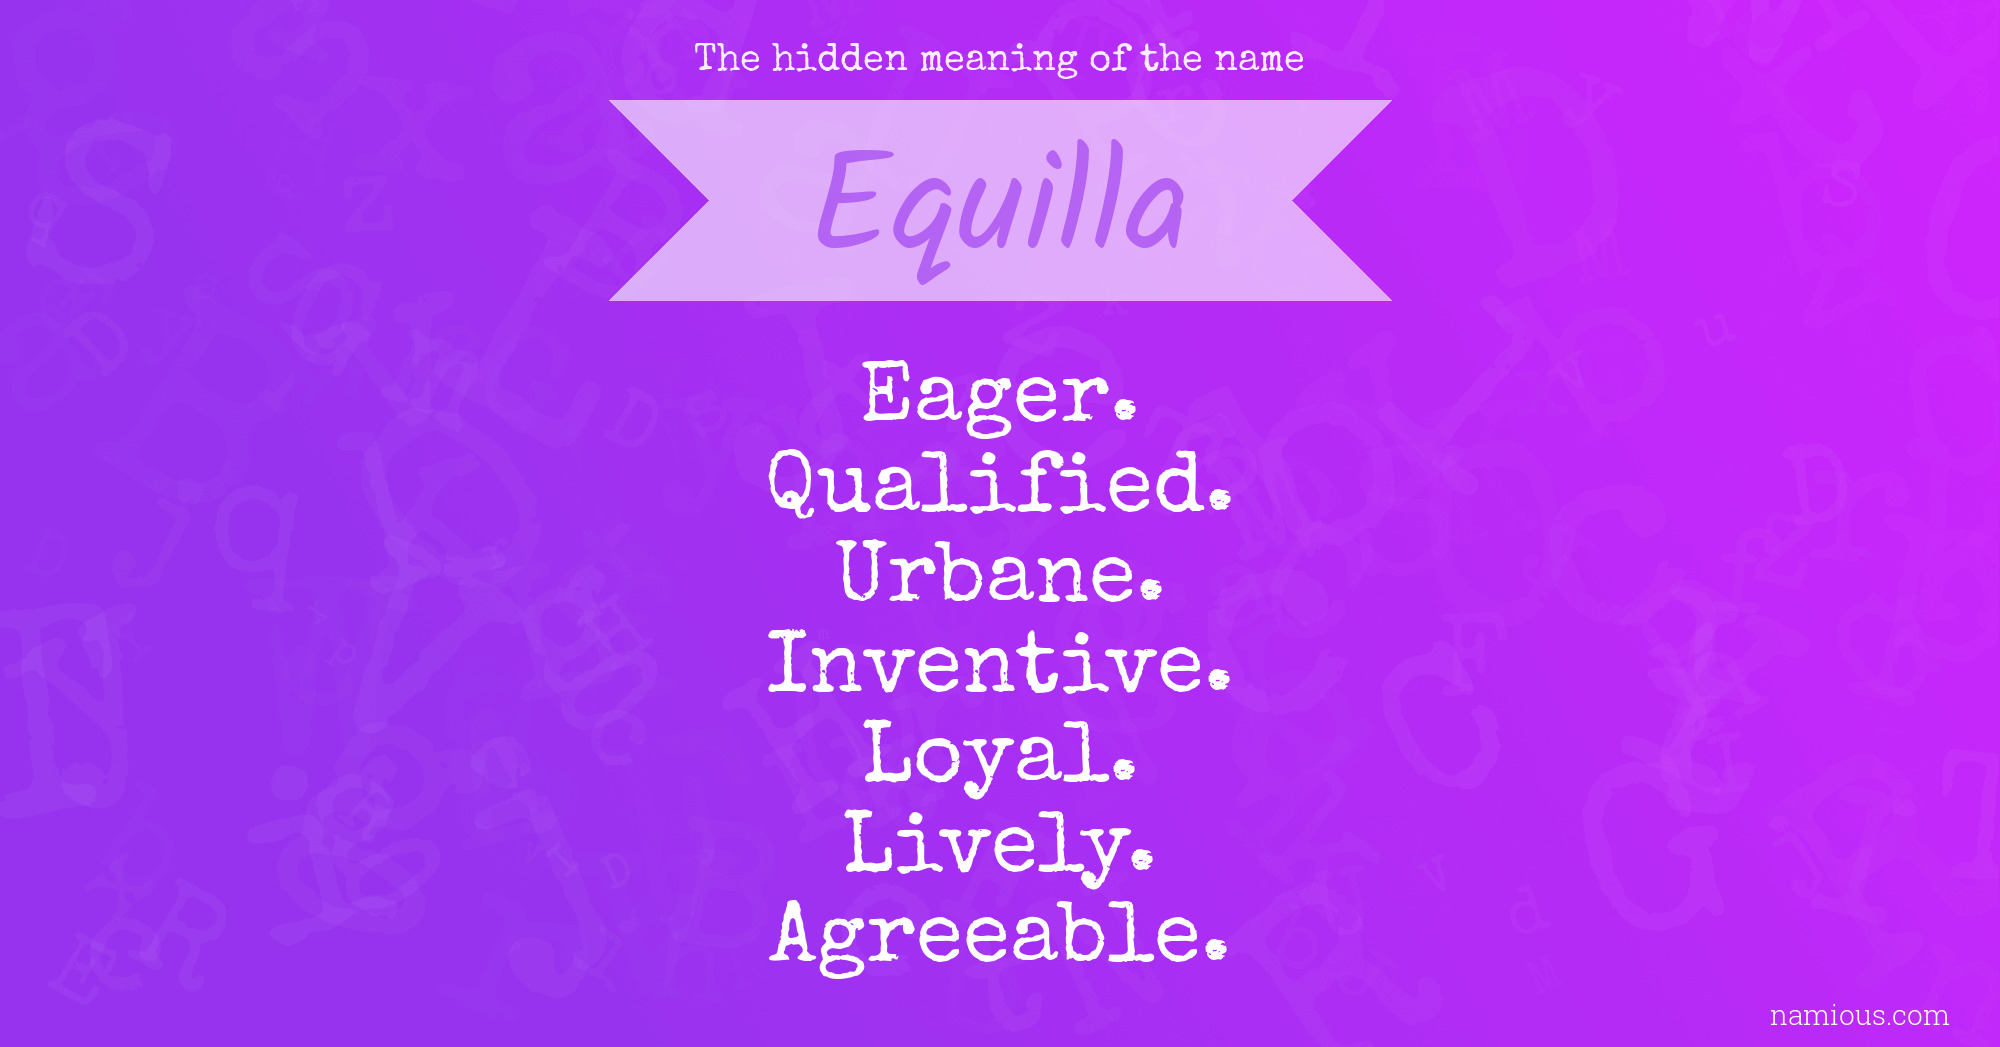 The hidden meaning of the name Equilla